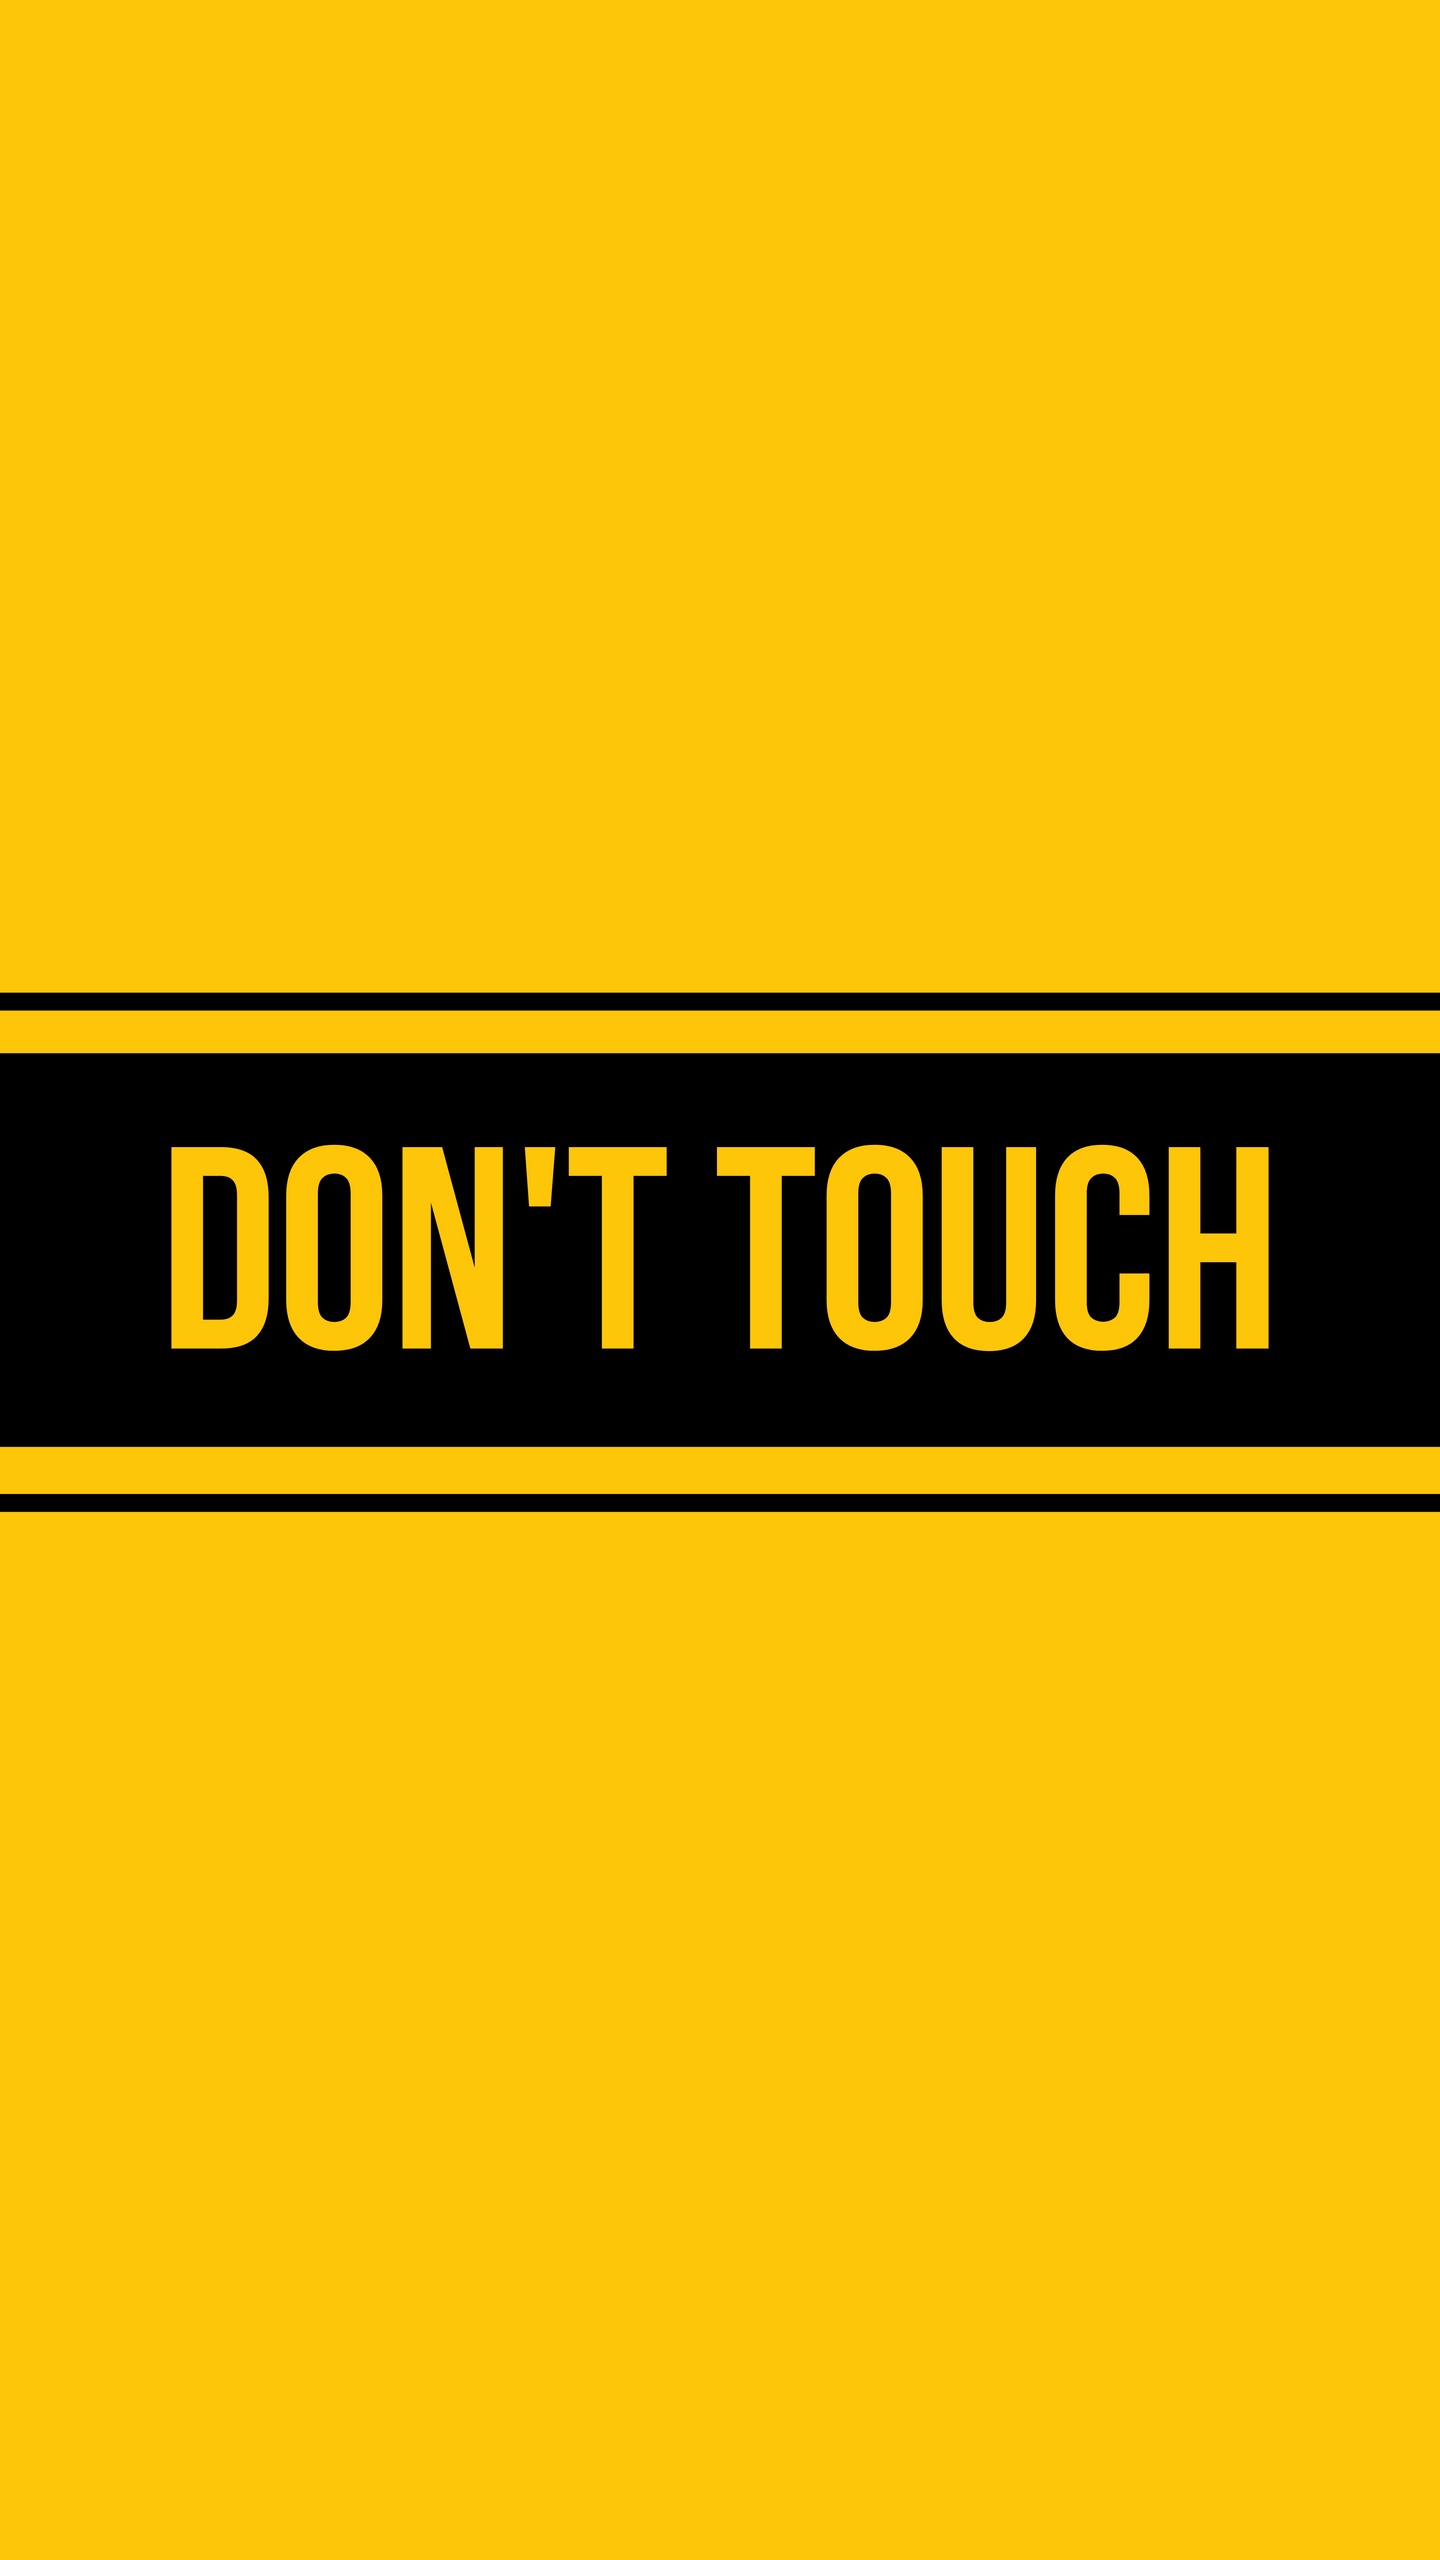 Wallpaper Dont Touch, Lock, Prohibition, Inscription - Don T Stop The Party - HD Wallpaper 